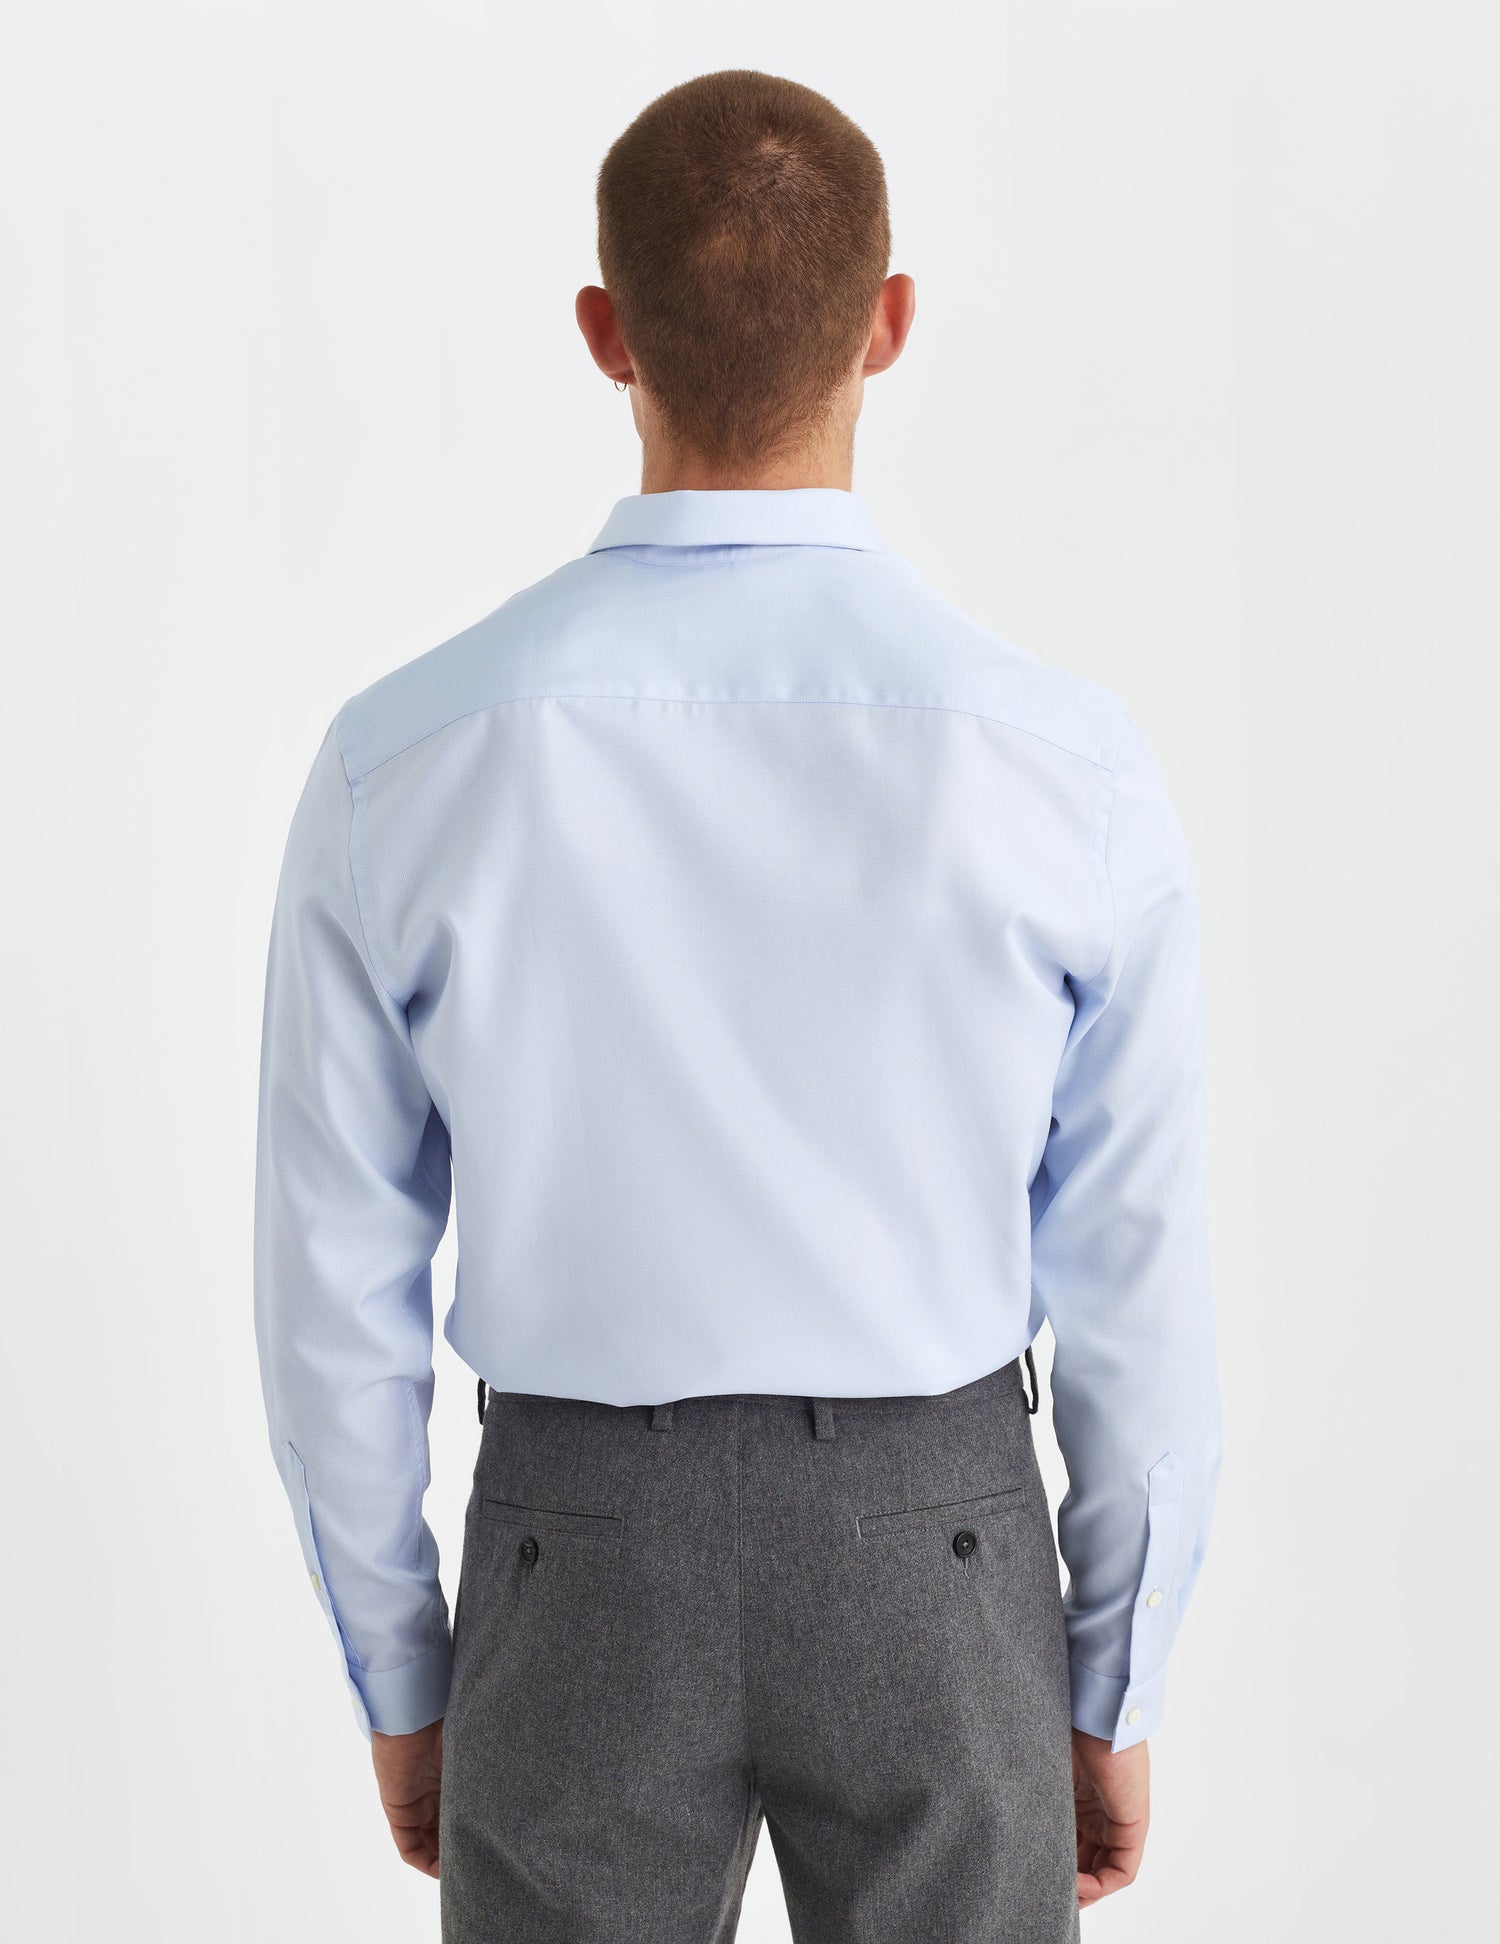 Fitted blue shirt - Shaped - Thin Collar#4